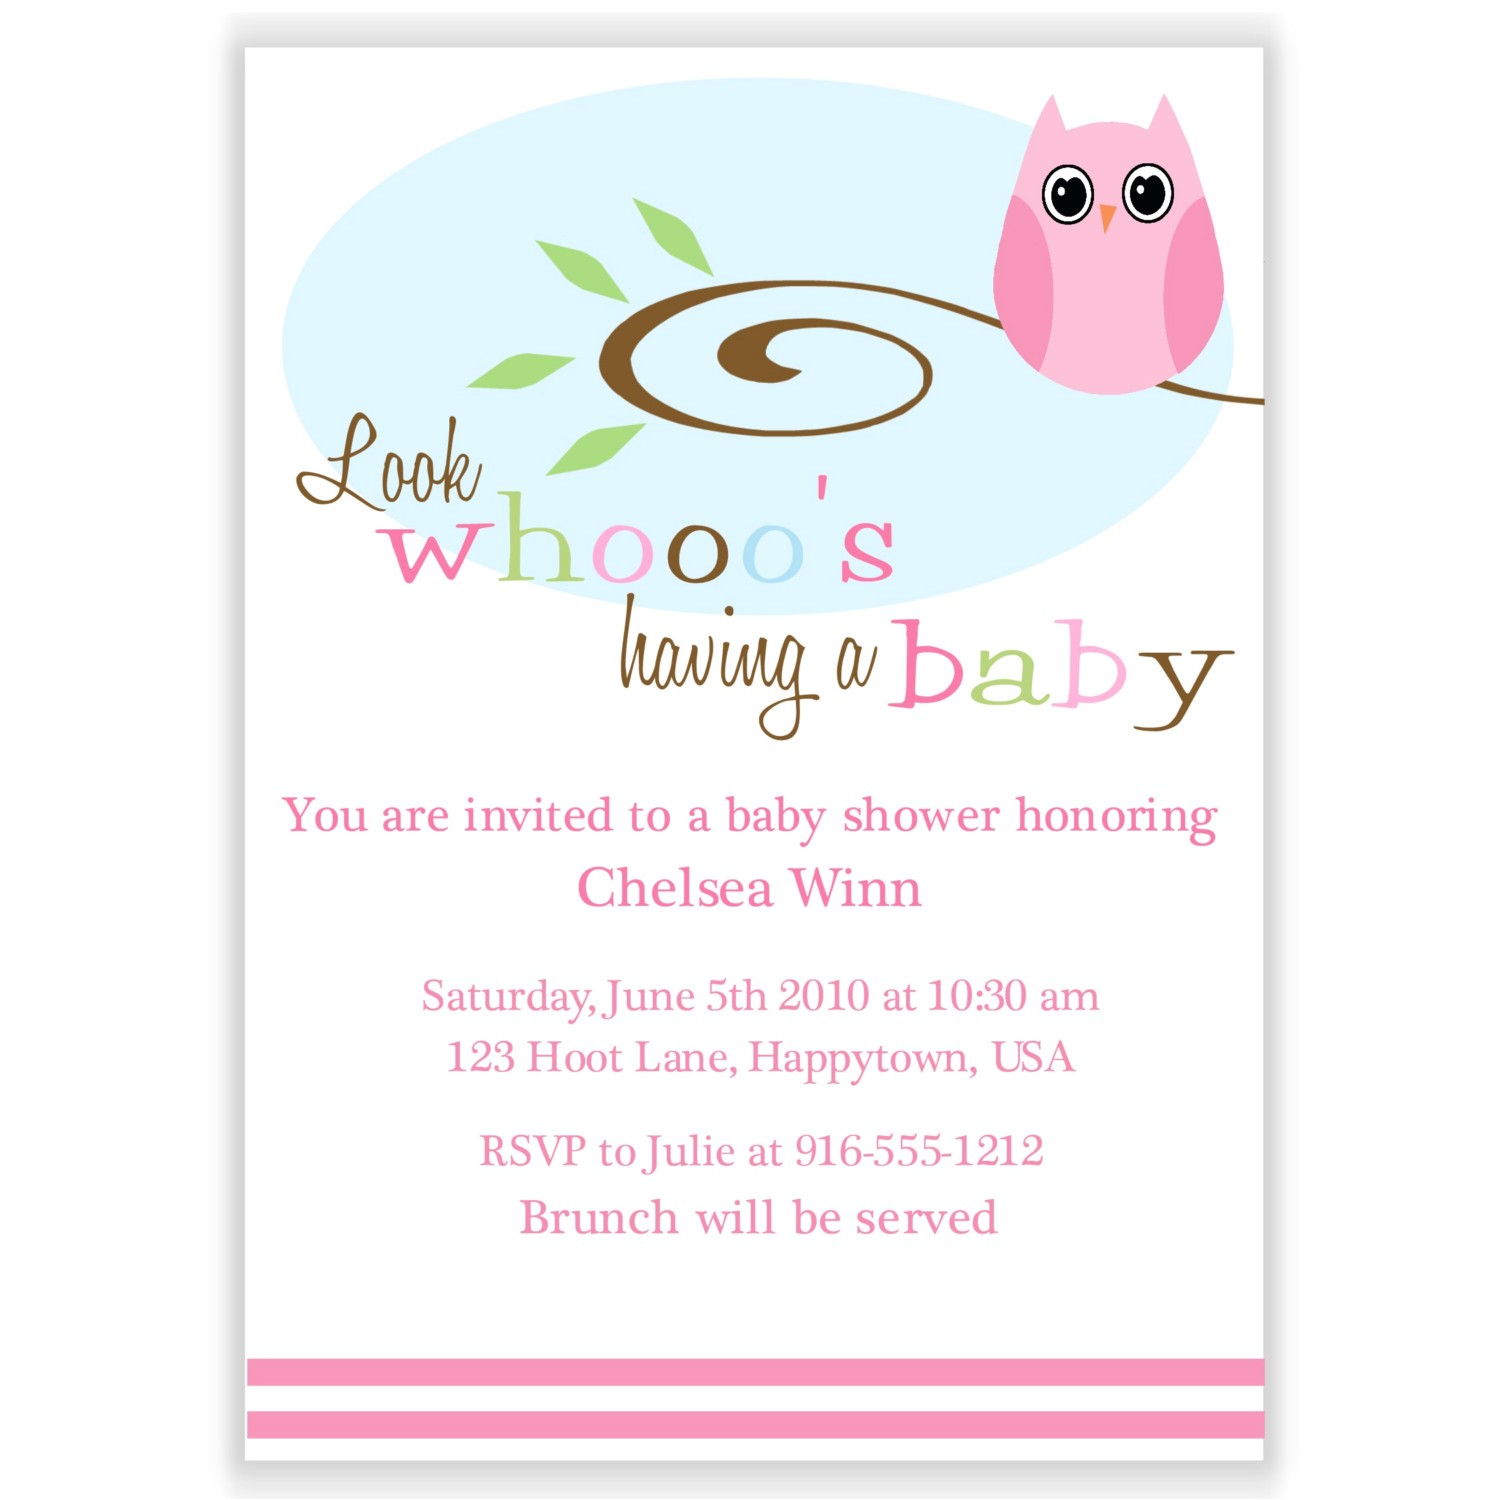 how to make shutterfly baby shower invitations templates the silverlininginvitations